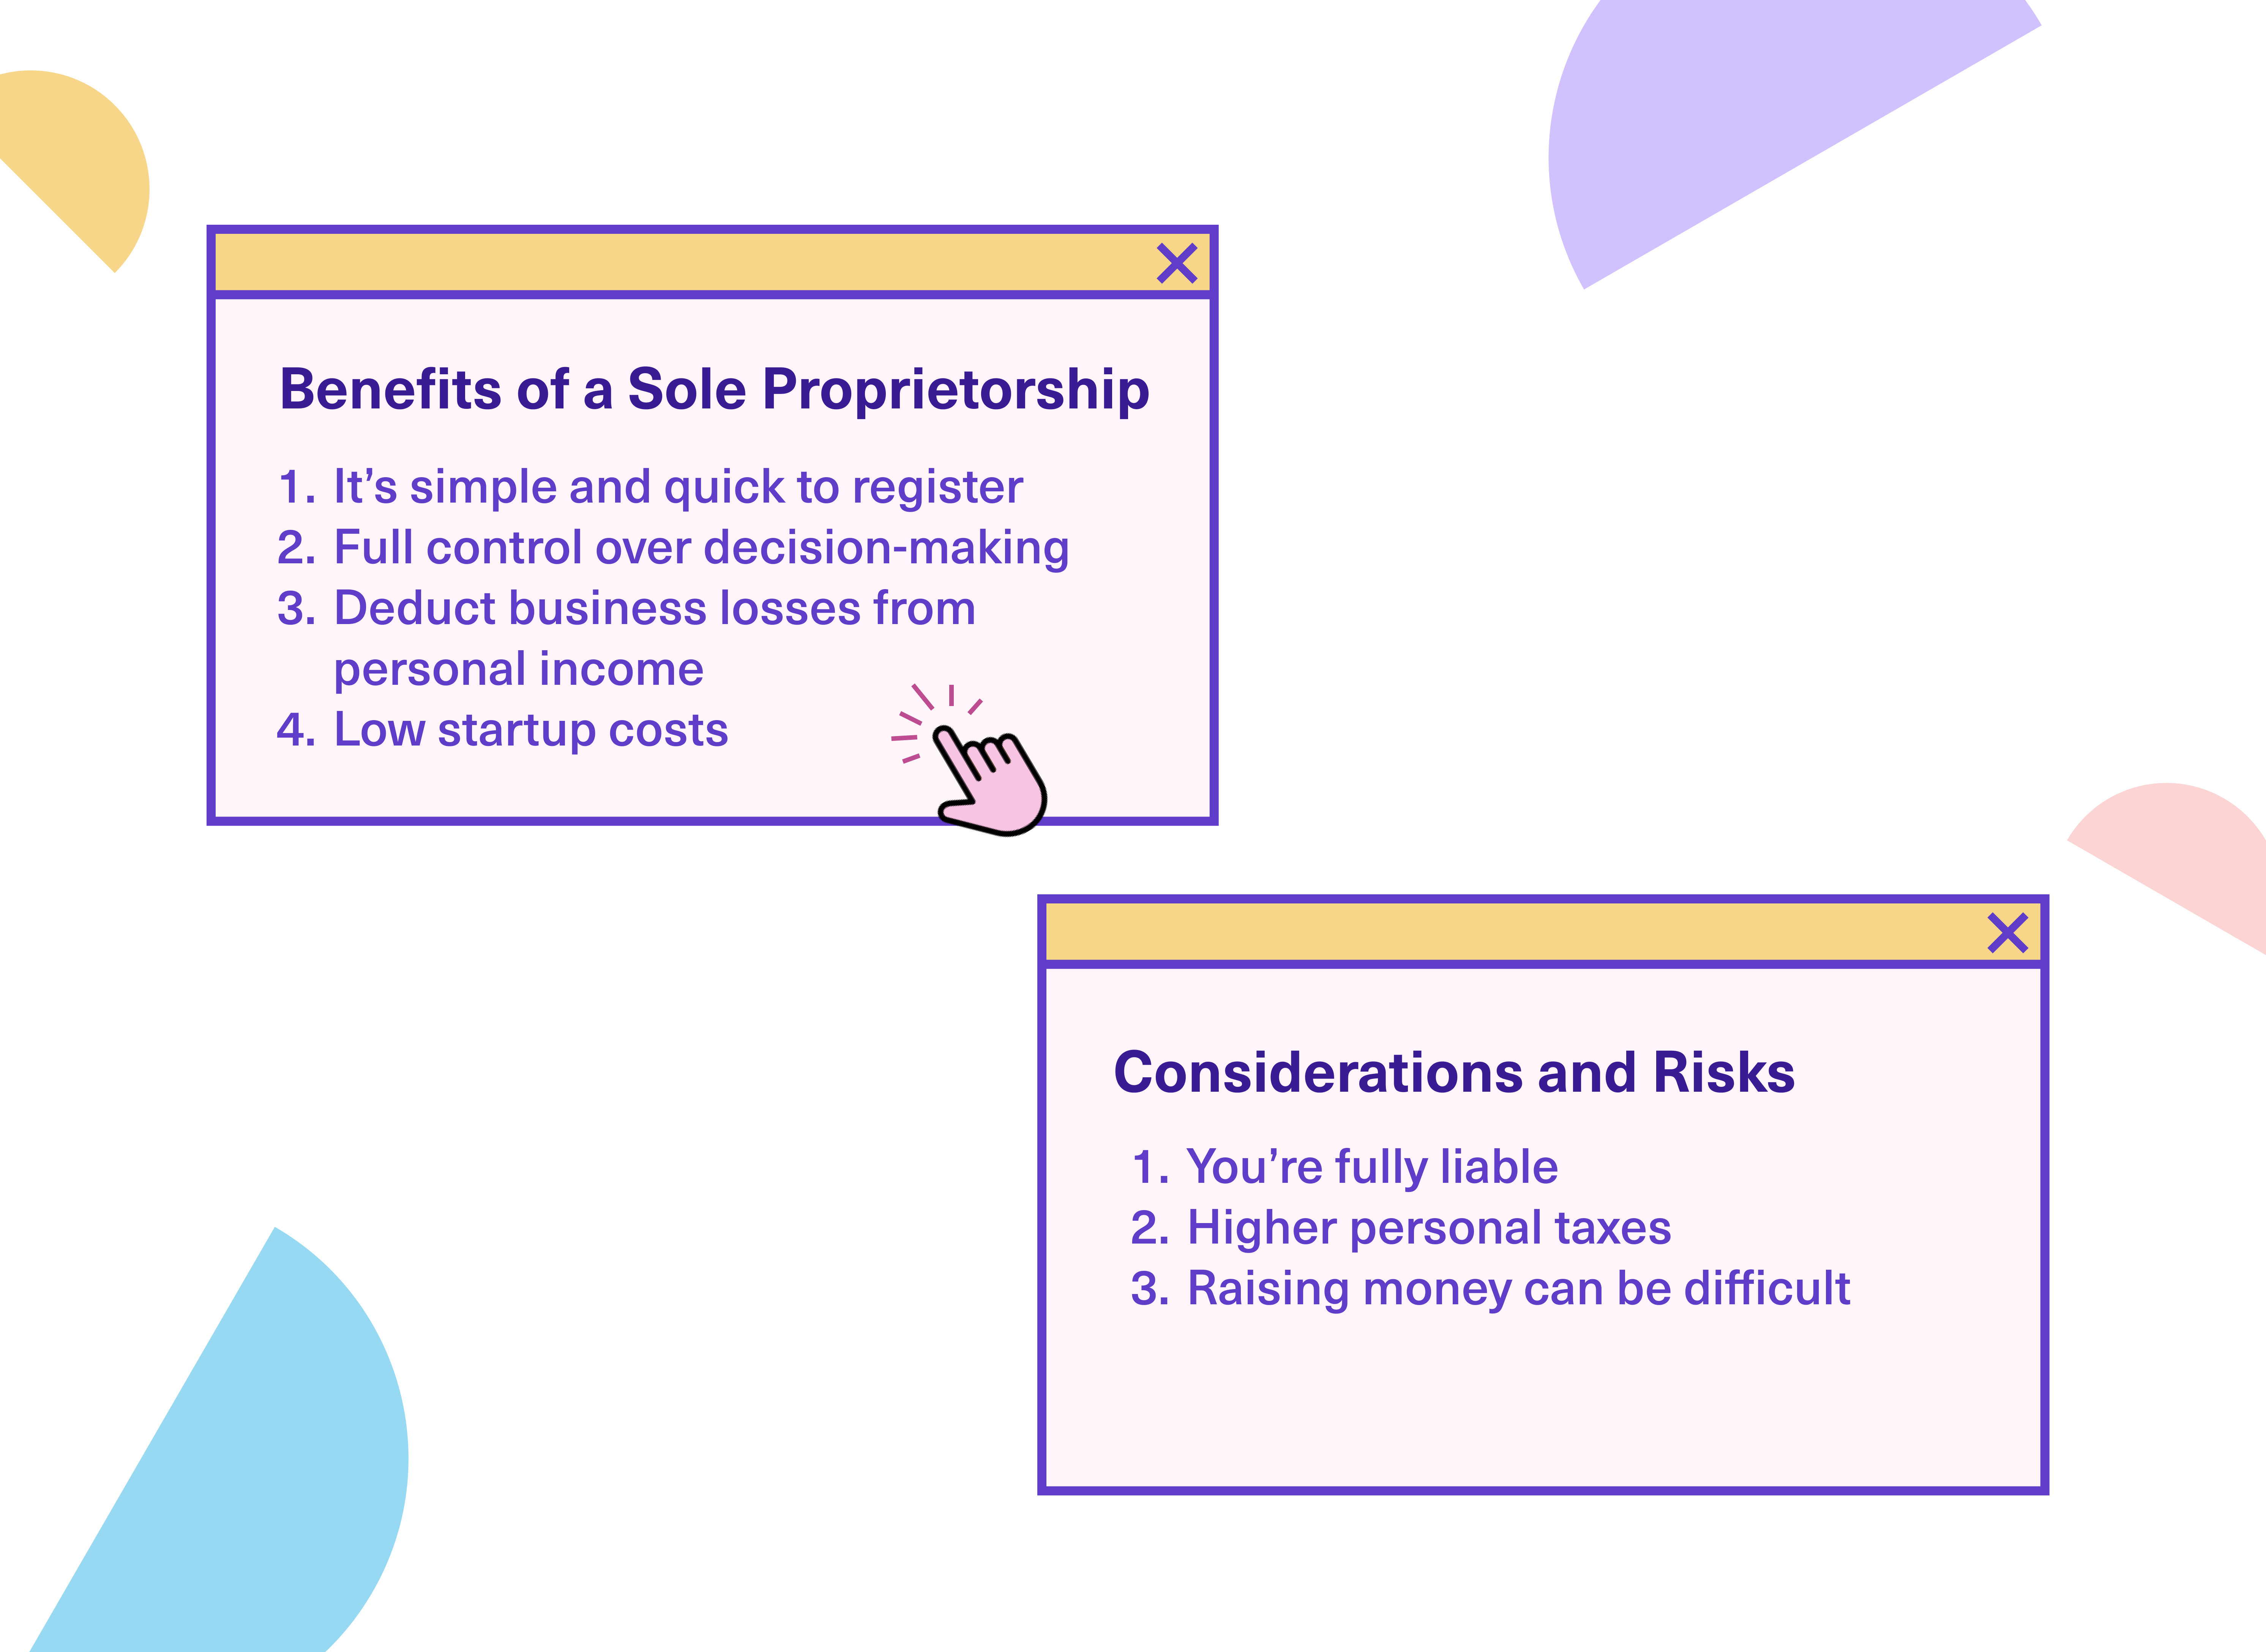 An infographic showing the pros and cons of a sole proprietorship vs incorporation